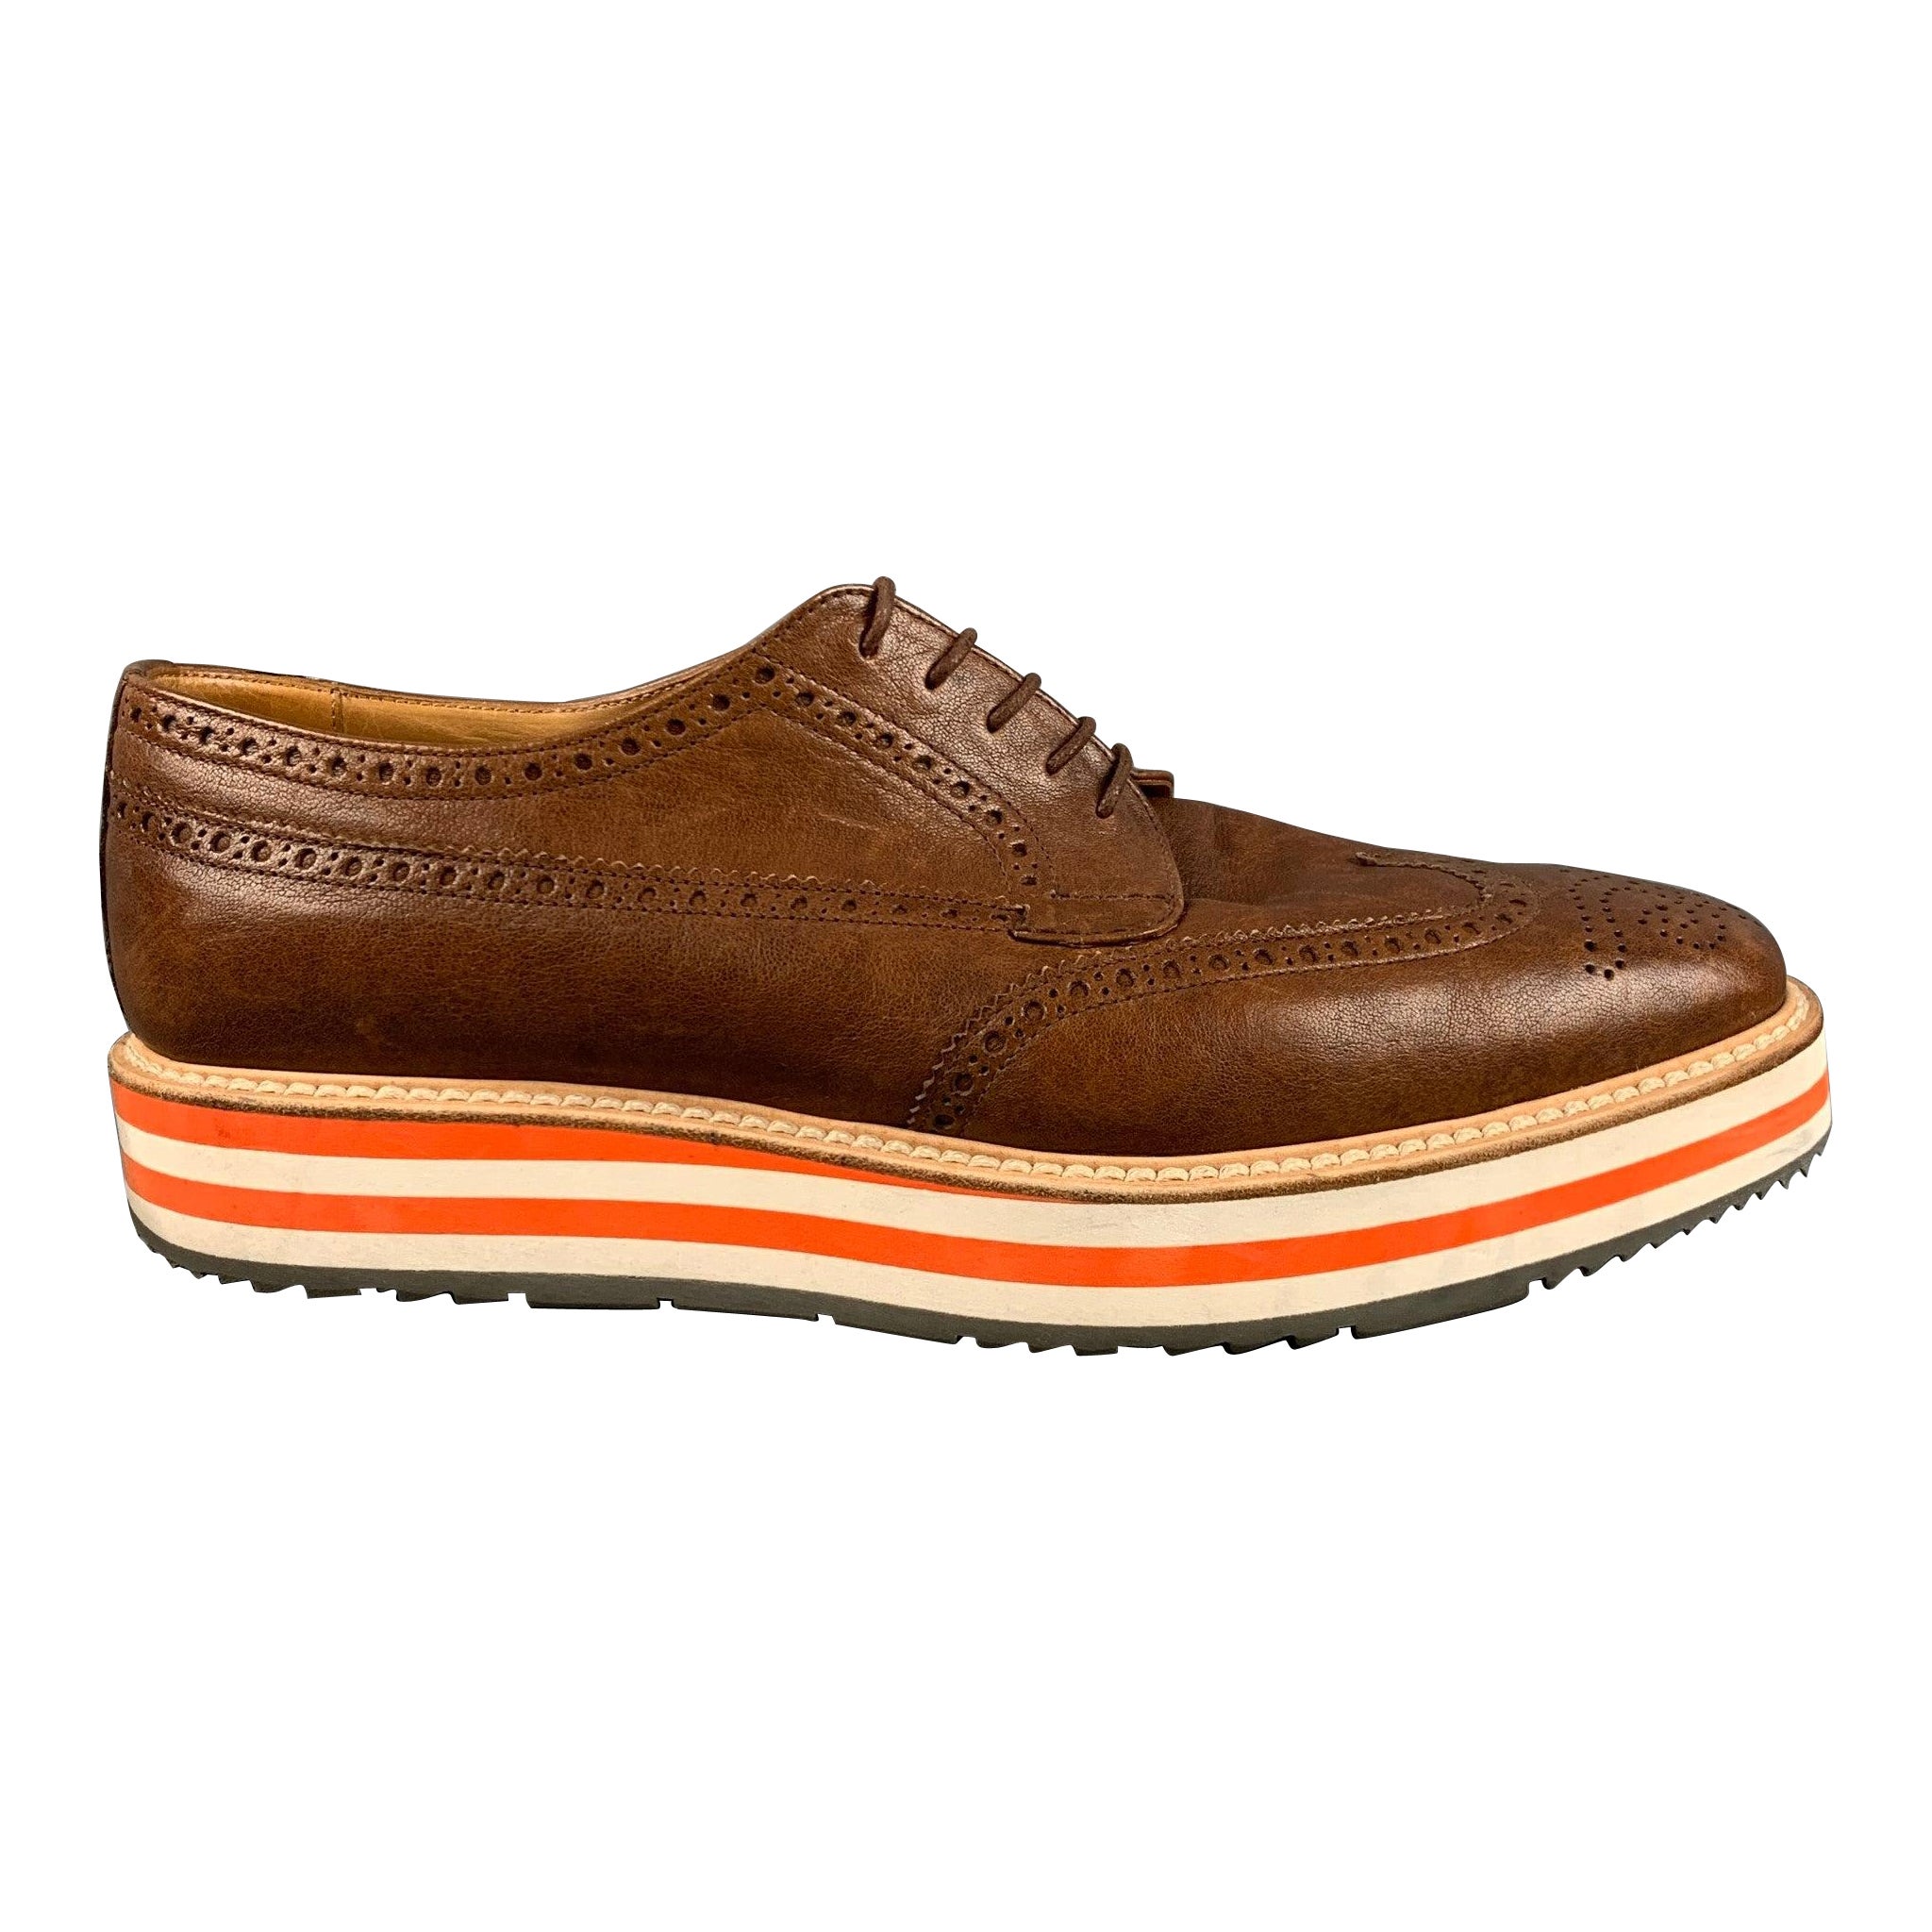 PRADA Size 9.5 Brown Perforated Leather Wingtip Lace Up Shoes For Sale